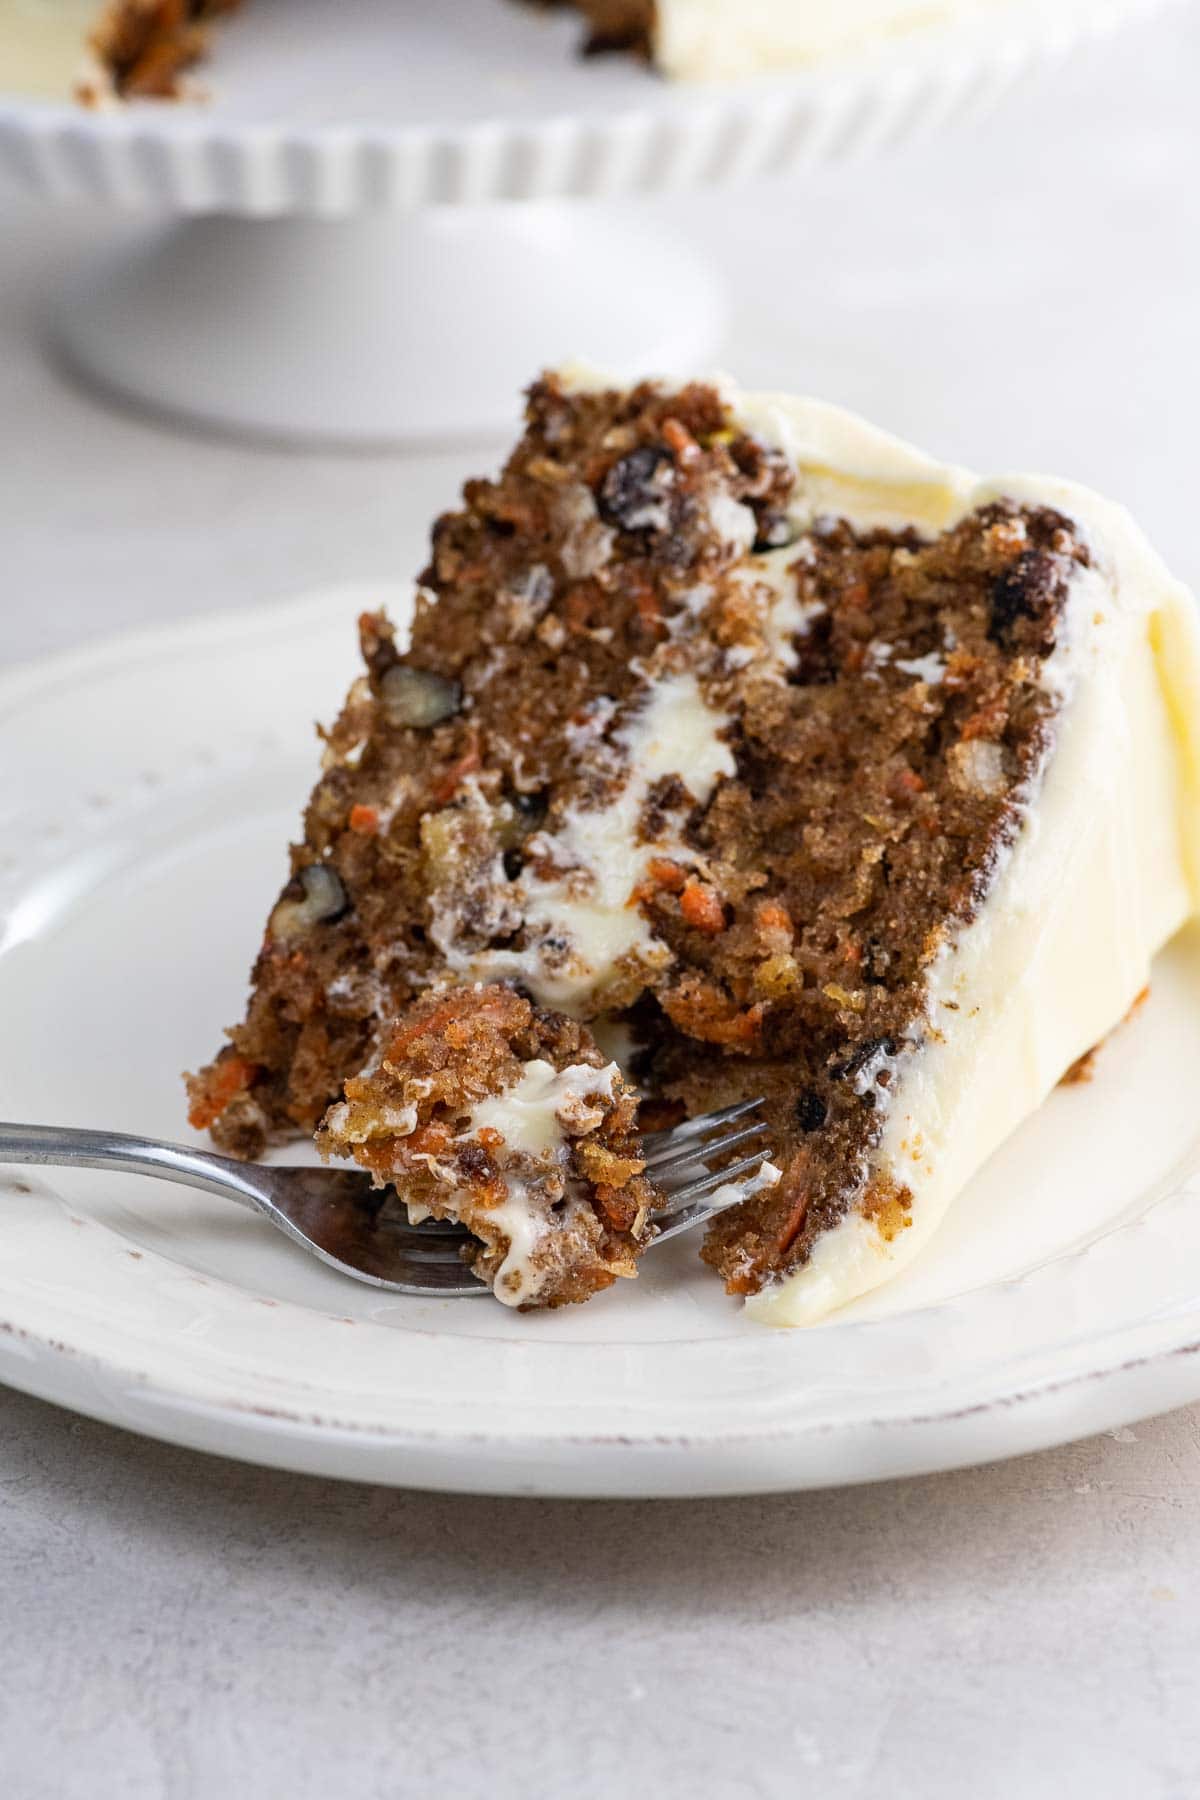 a slice of King Arthur carrot cake with not too sweet cream cheese frosting on a plate